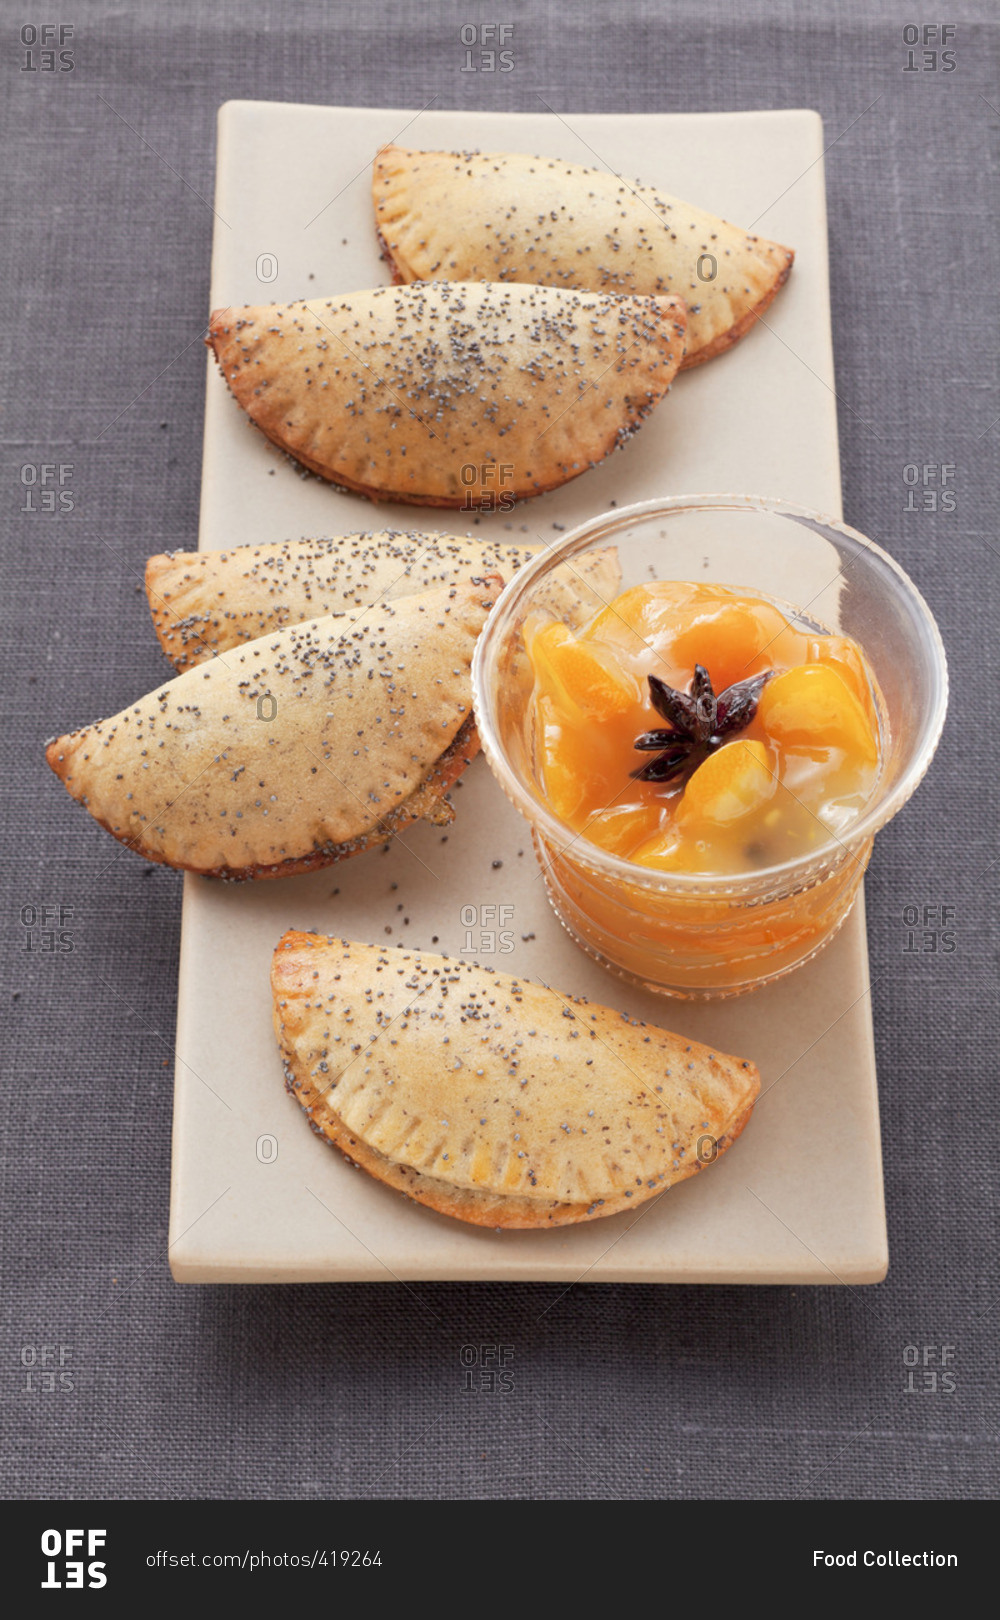 Sweet poppy seed pierogi (steamed dough parcels) with orange dip on an oblong plate